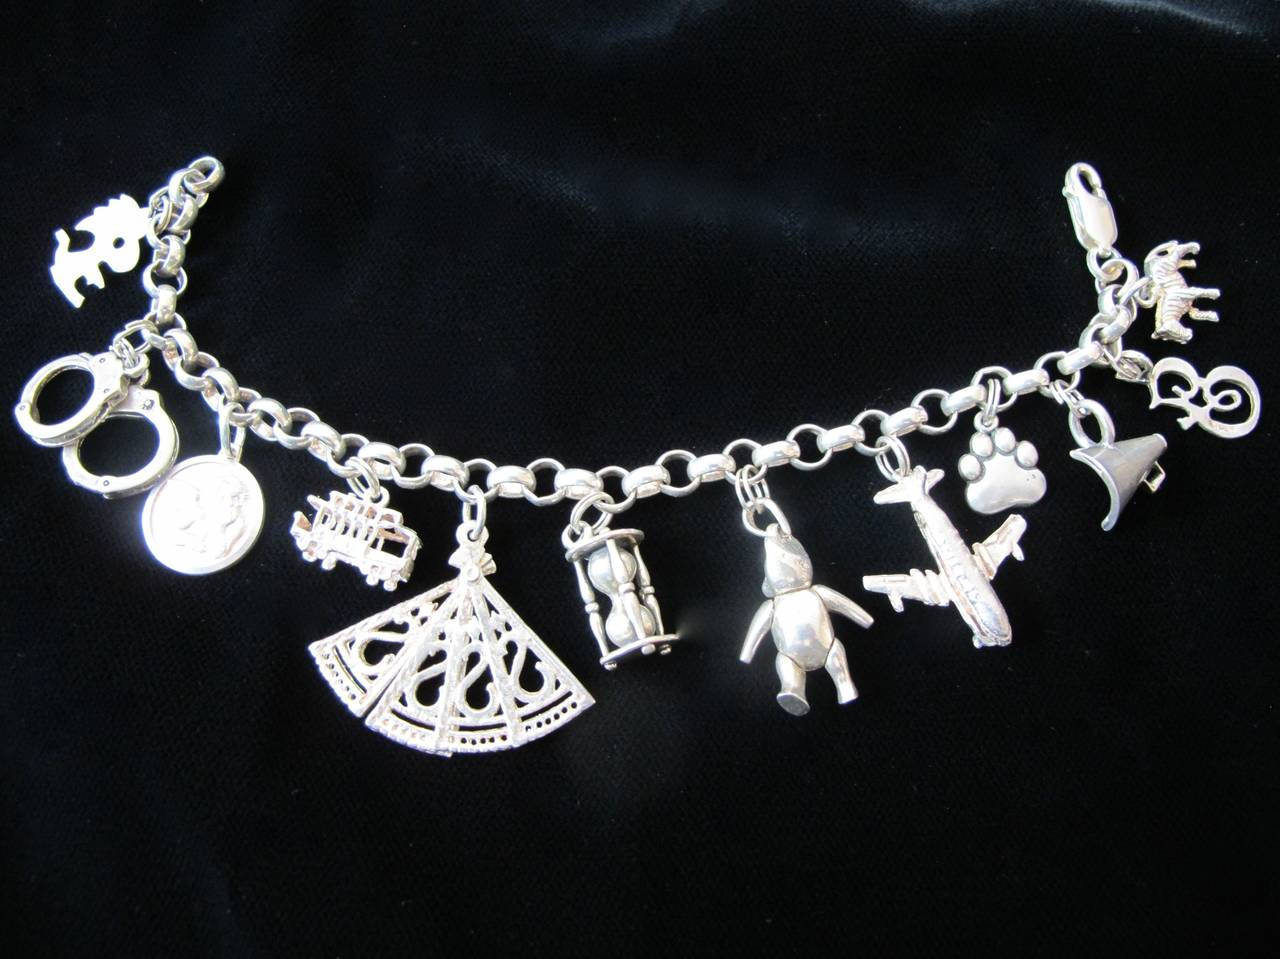 Engaging bracelet with twelve charms: Snoopy's Woodstock, pair of handcuffs, an angel, a cable car, a fan that opens, an hourglass, a teddy bear with moveable arms and legs, an airplane that opens, a paw print, a bull horn, the letter 